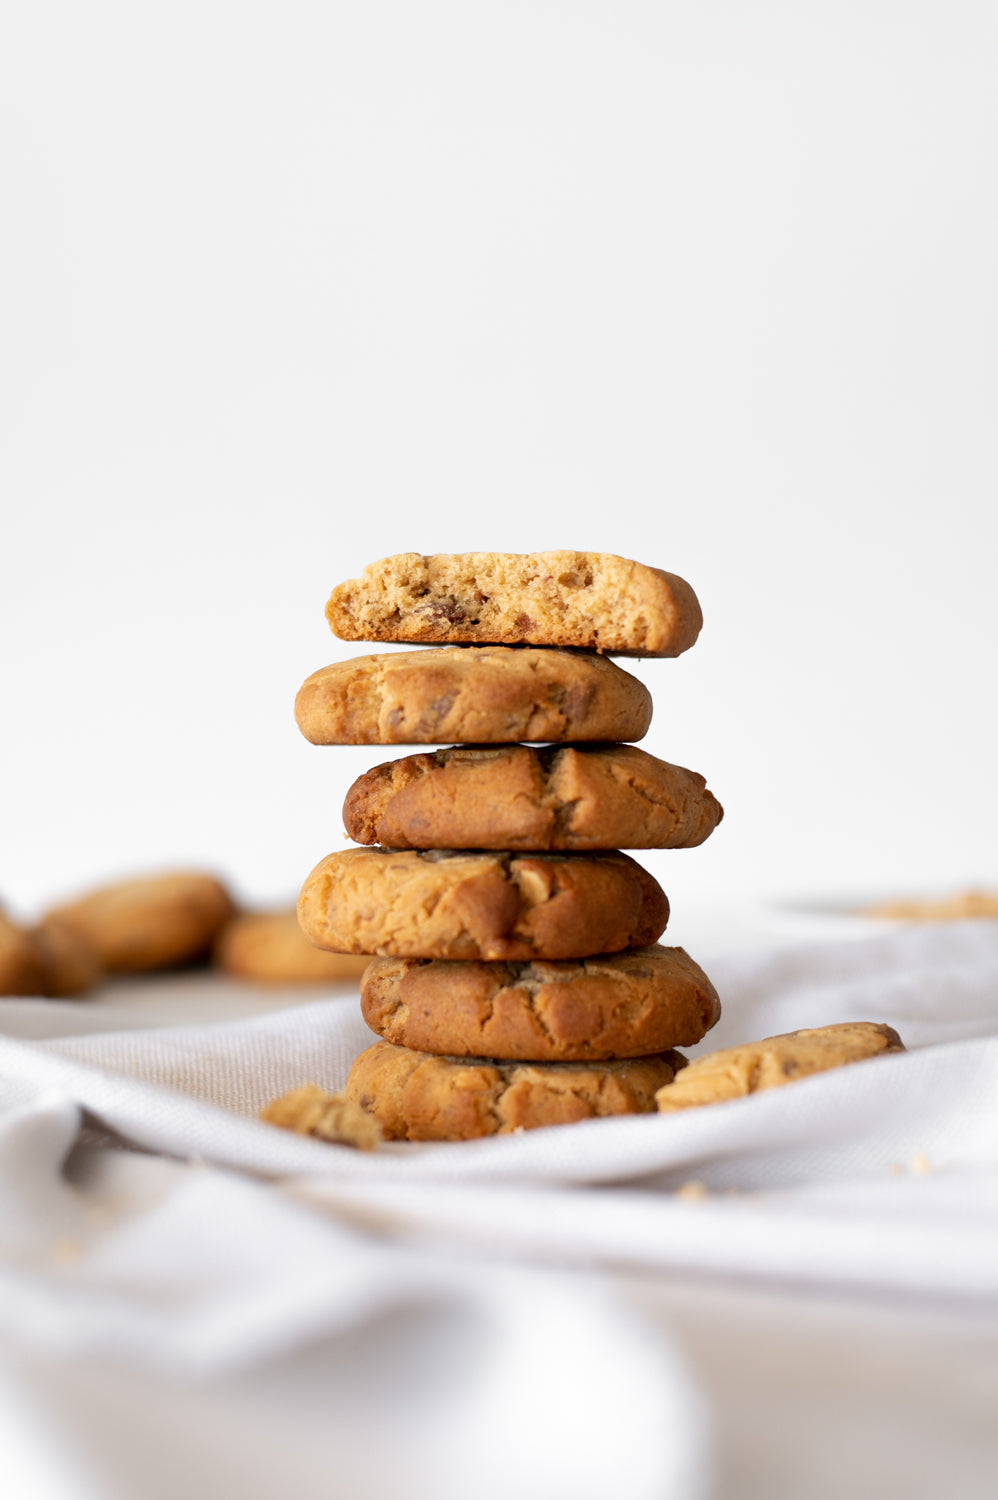 A stack of Peanut Butter and Choc Chip Cookies on a cloth